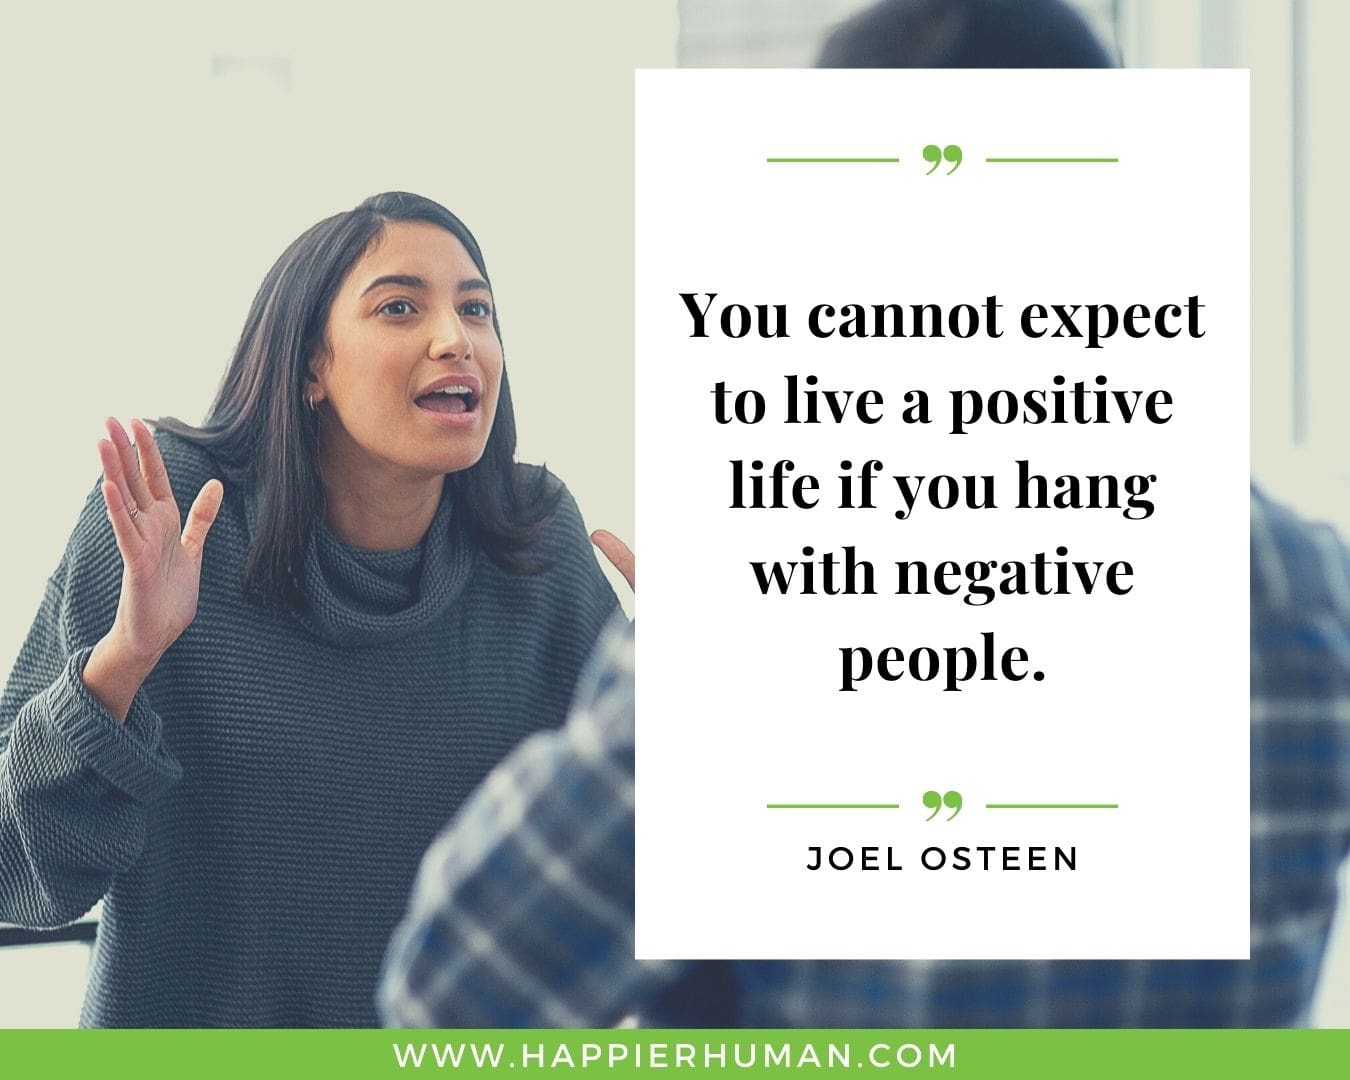 Haters Quotes - “You cannot expect to live a positive life if you hang with negative people.” - Joel Osteen